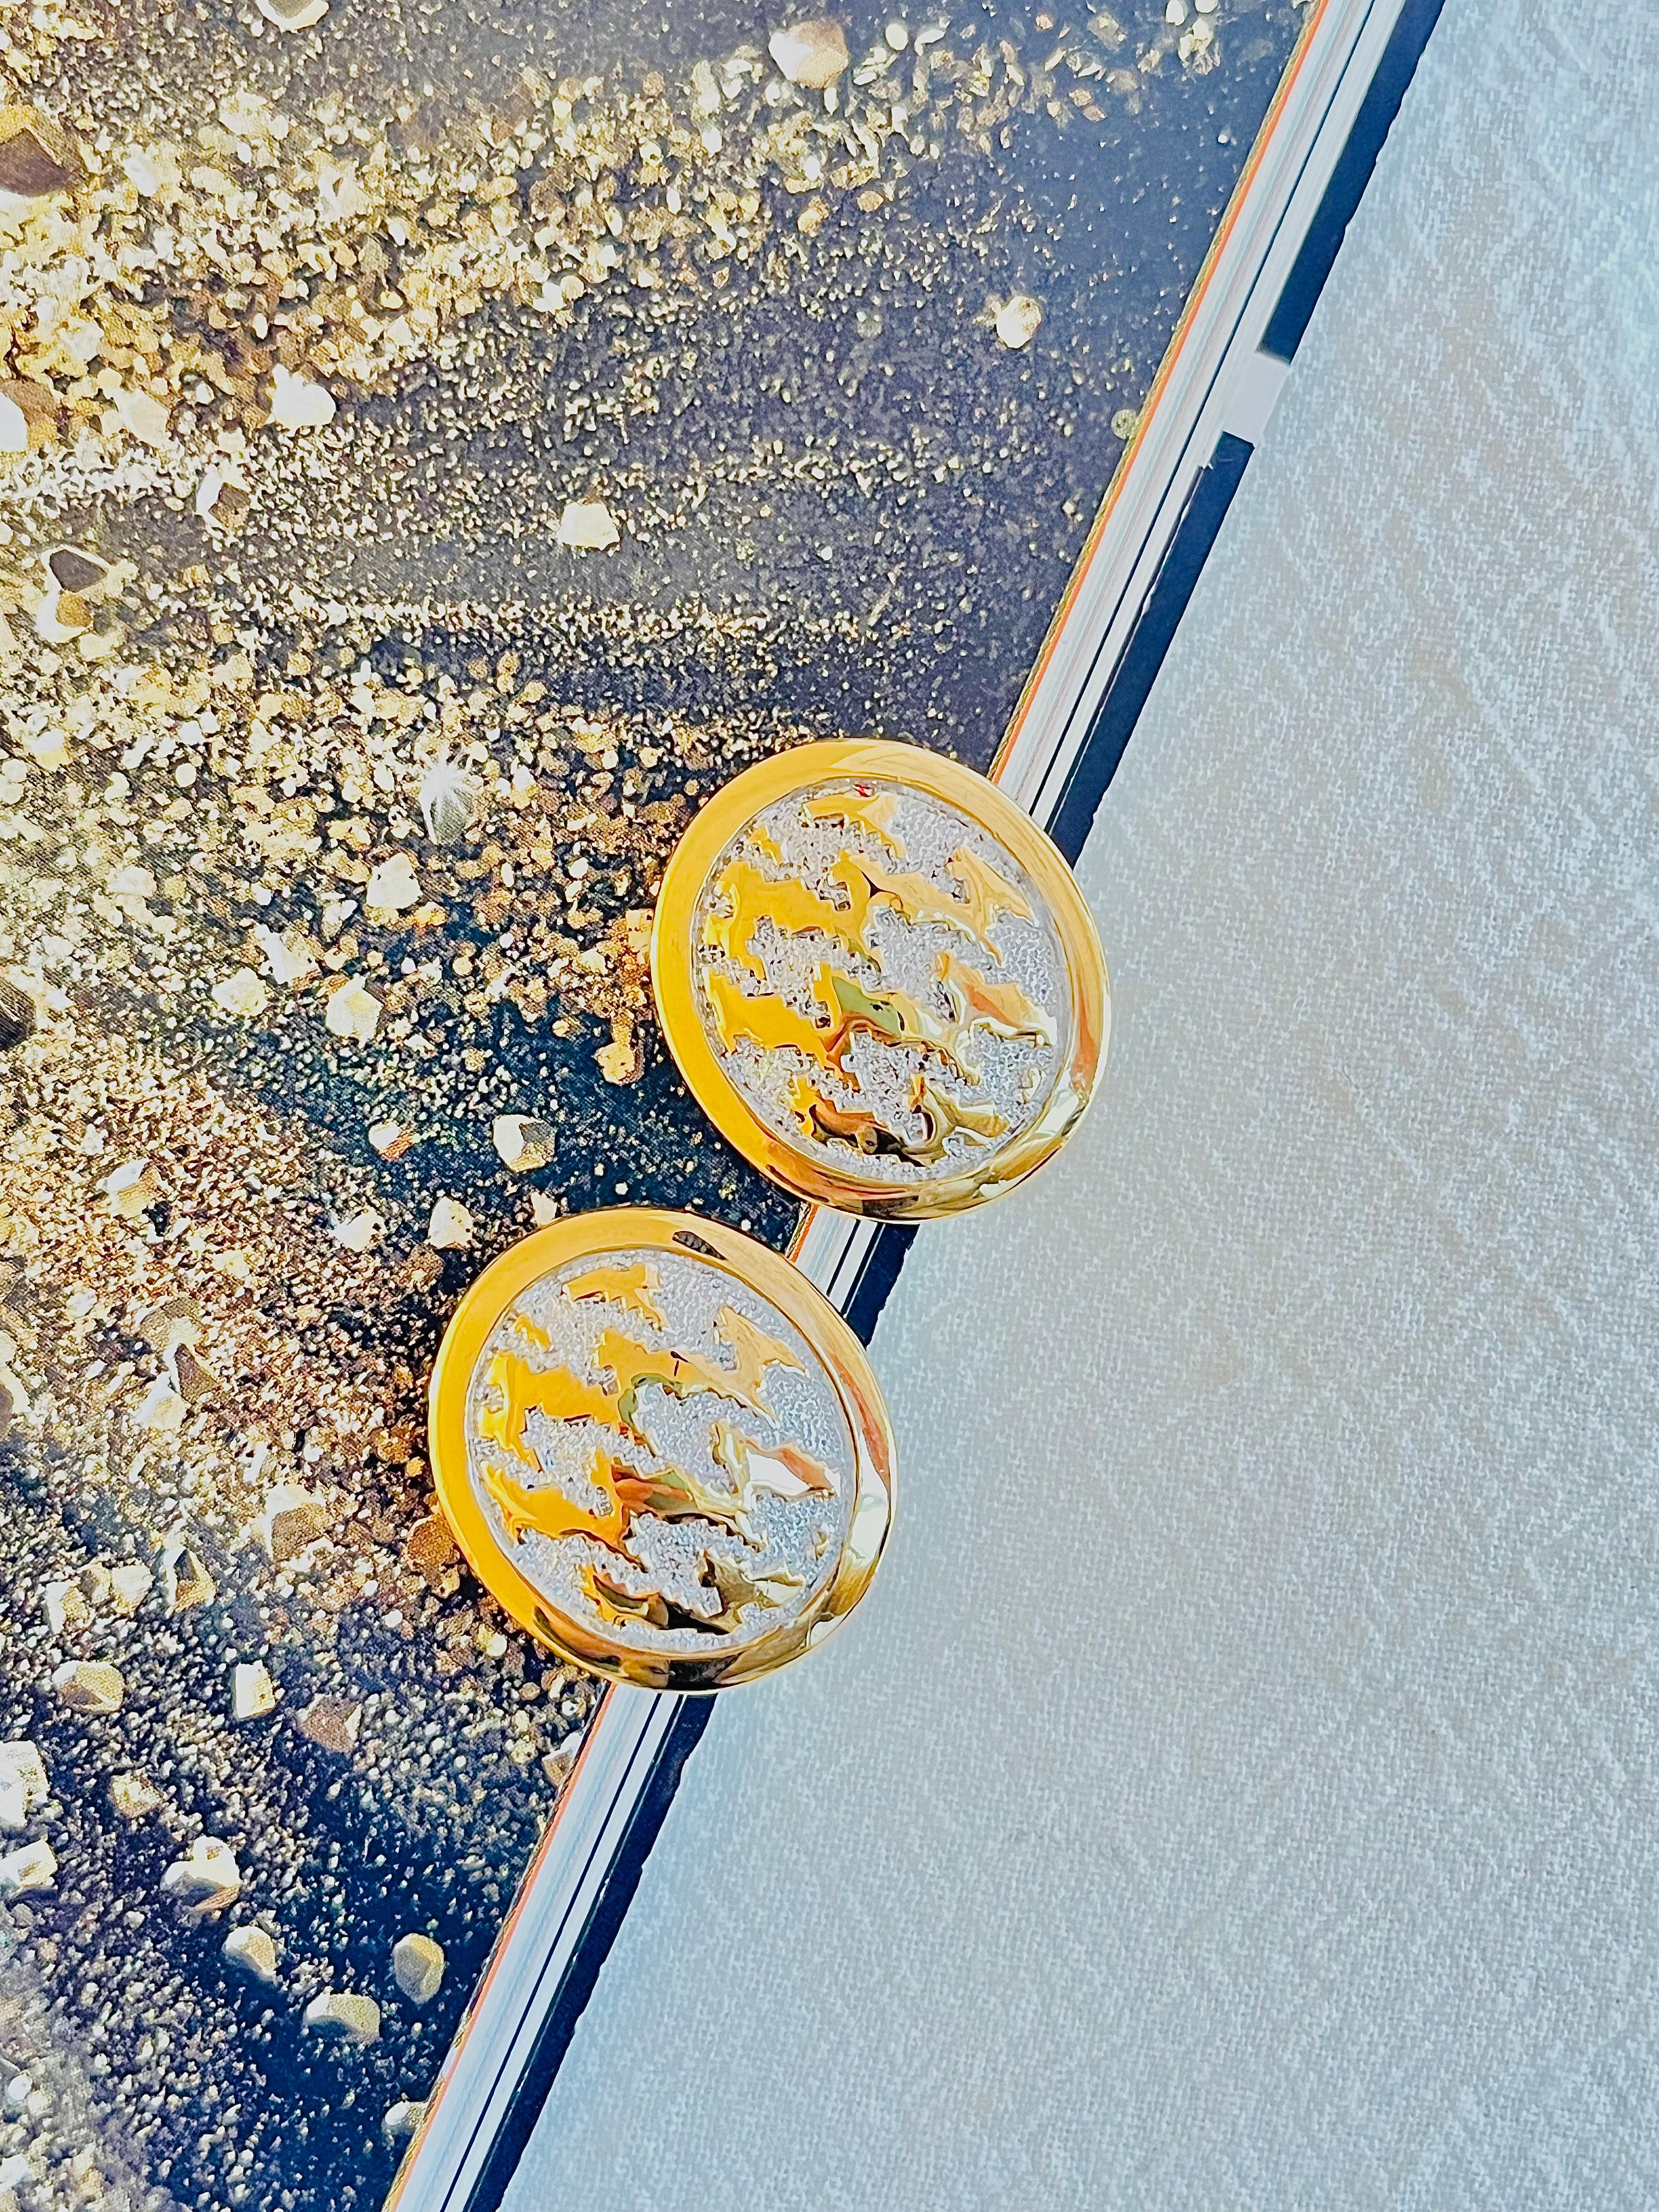 Very excellent condition. Very new. 100% genuine. 

A very beautiful pair of clip on earrings by Chr. DIOR, signed at the back.

Size: 2.5*2.0 cm.

Weight: 9 g/each.

_ _ _

Great for everyday wear. Come with velvet pouch and beautiful